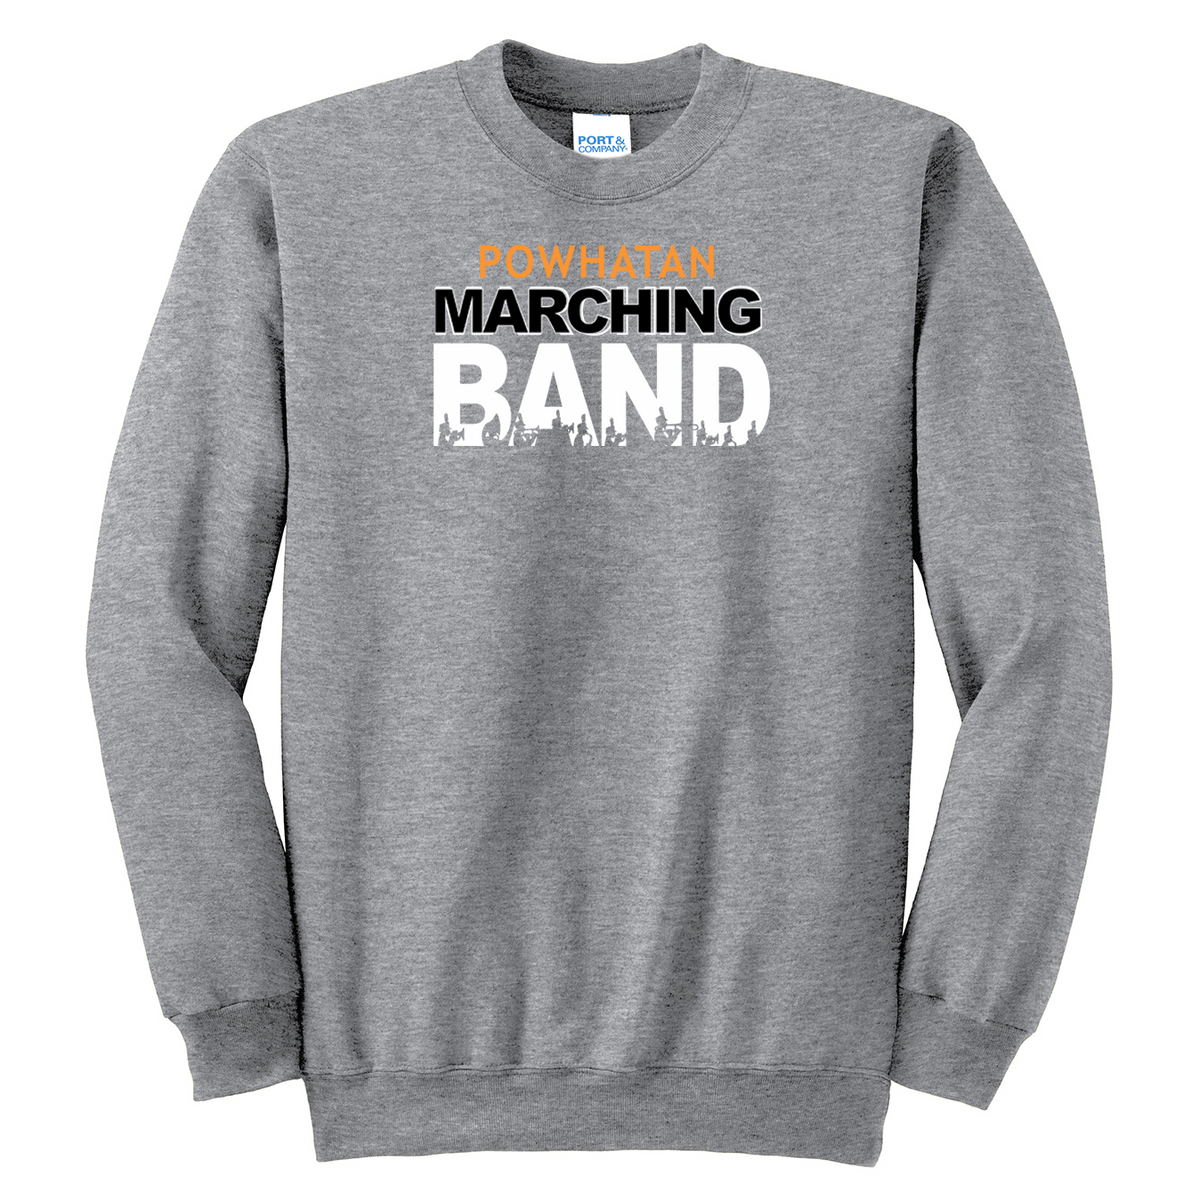 Powhatan Marching Band Crew Neck Sweater